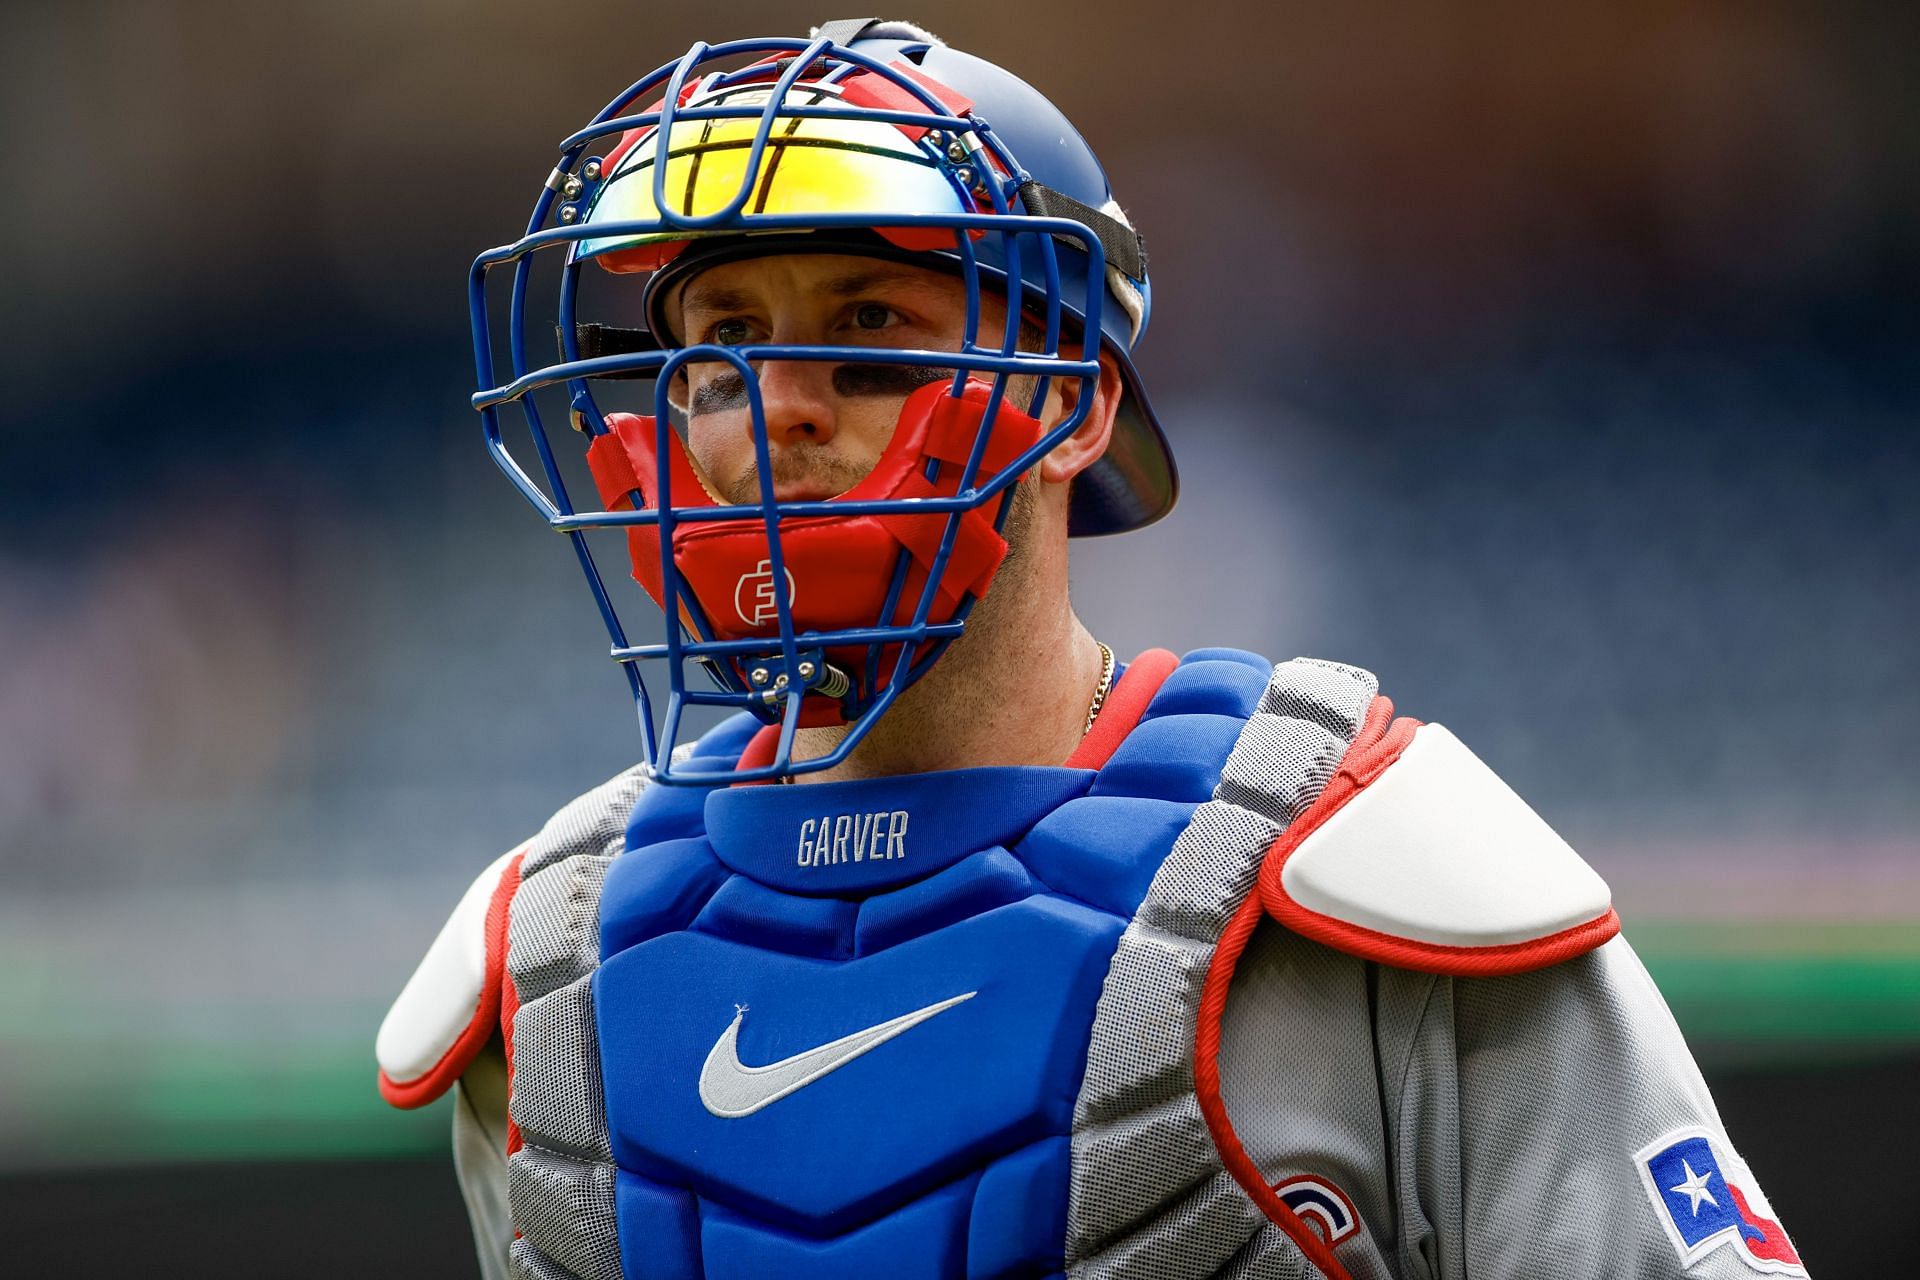 Could Rangers catcher Jonah Heim be on cusp of return to active